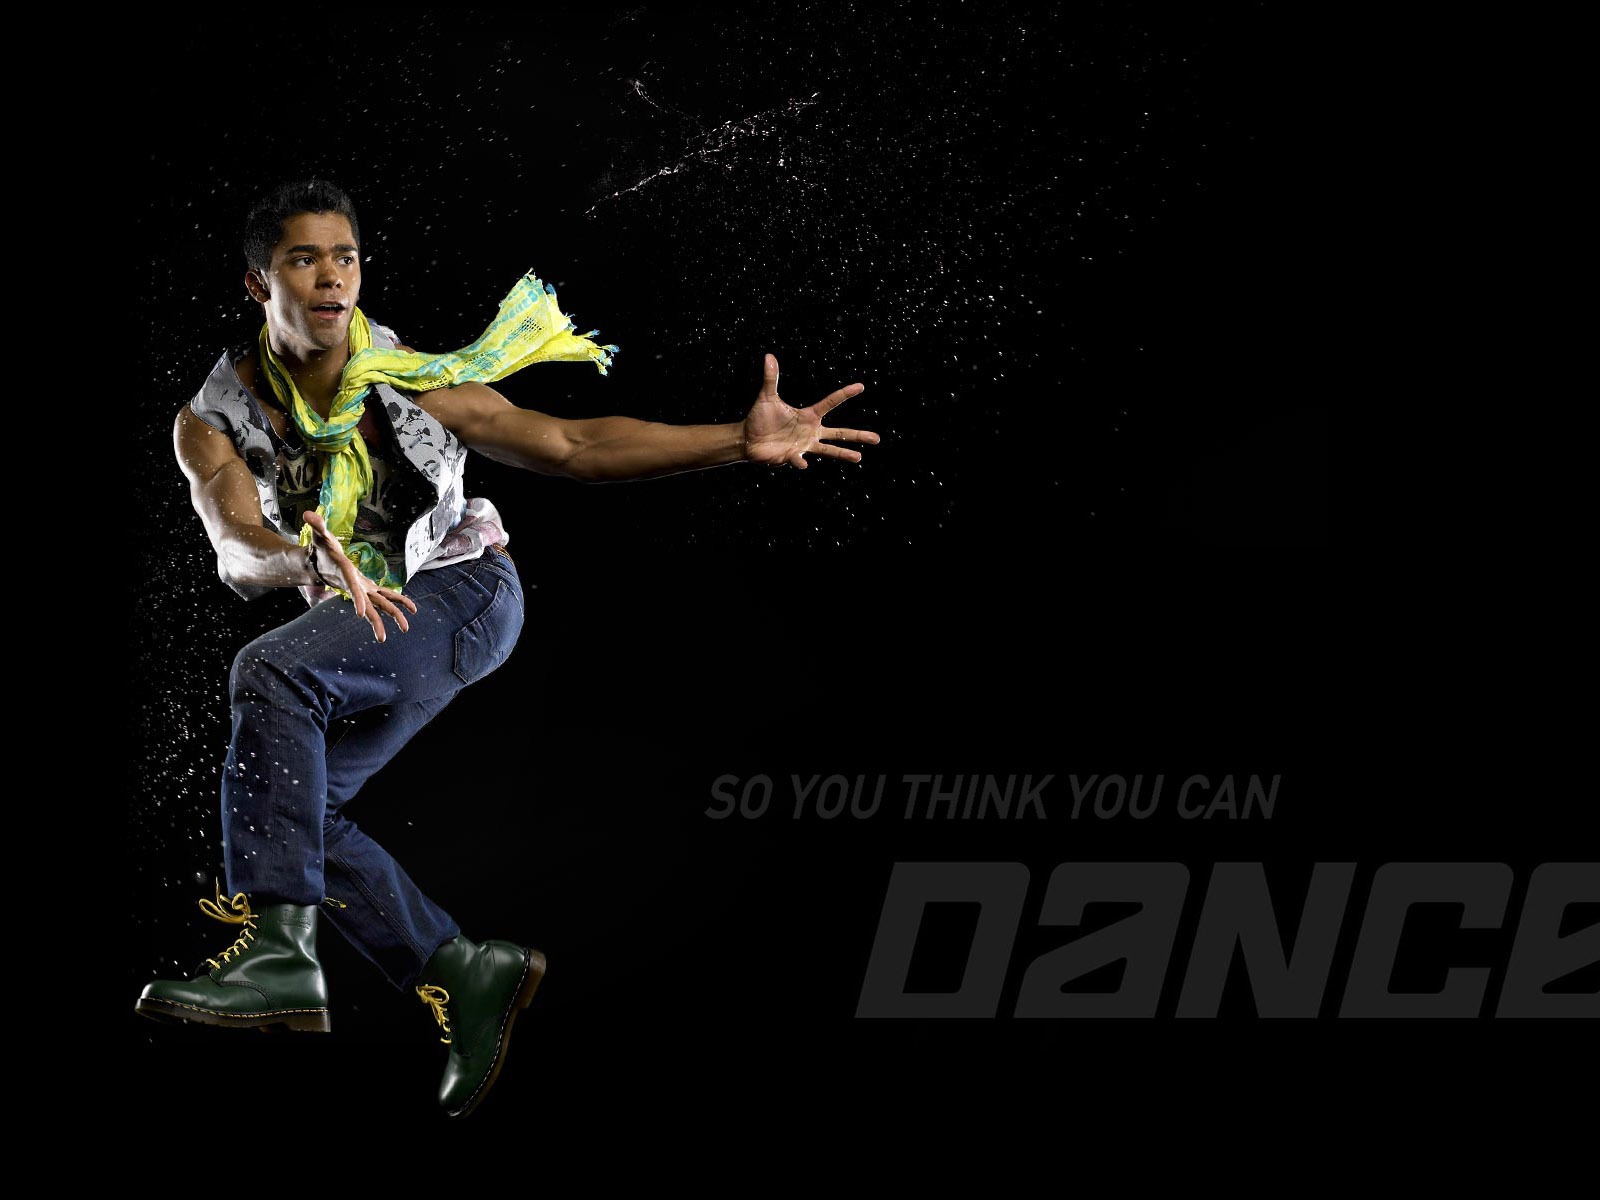 So You Think You Can Dance Wallpaper (1) #2 - 1600x1200